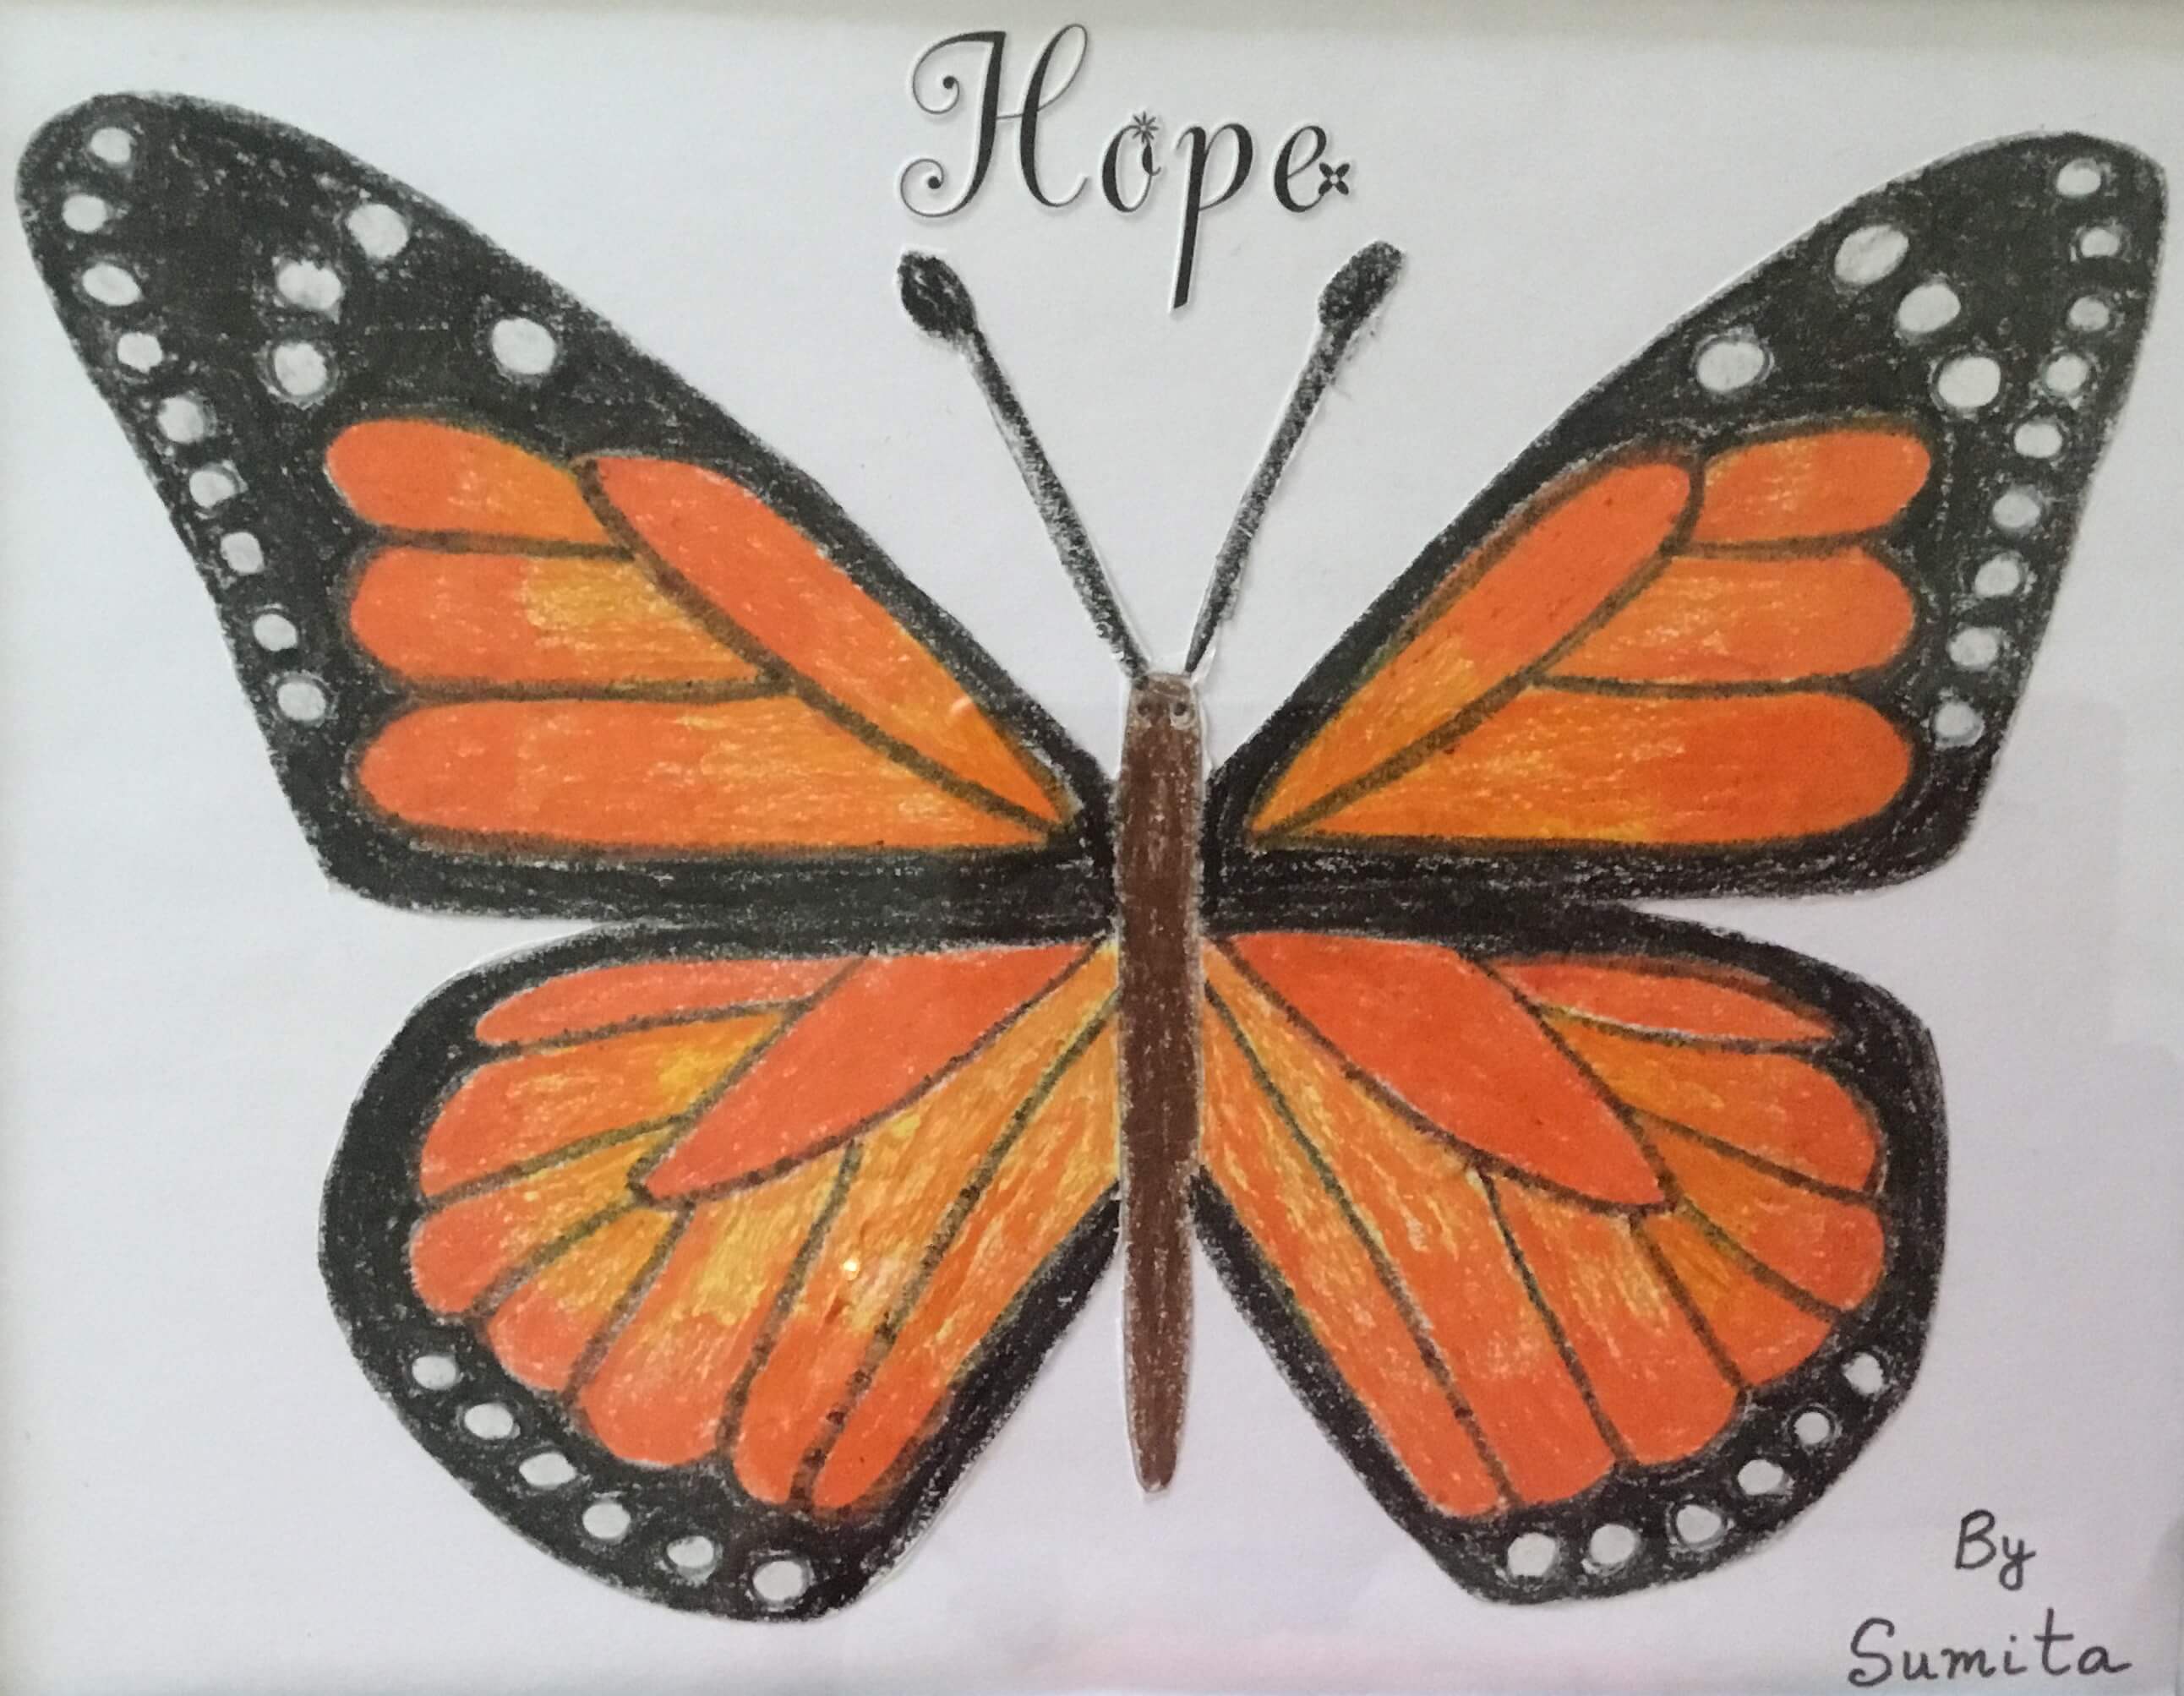 Drawing of a Monarch butterfly with the written message Hope made by Sumita Bose.